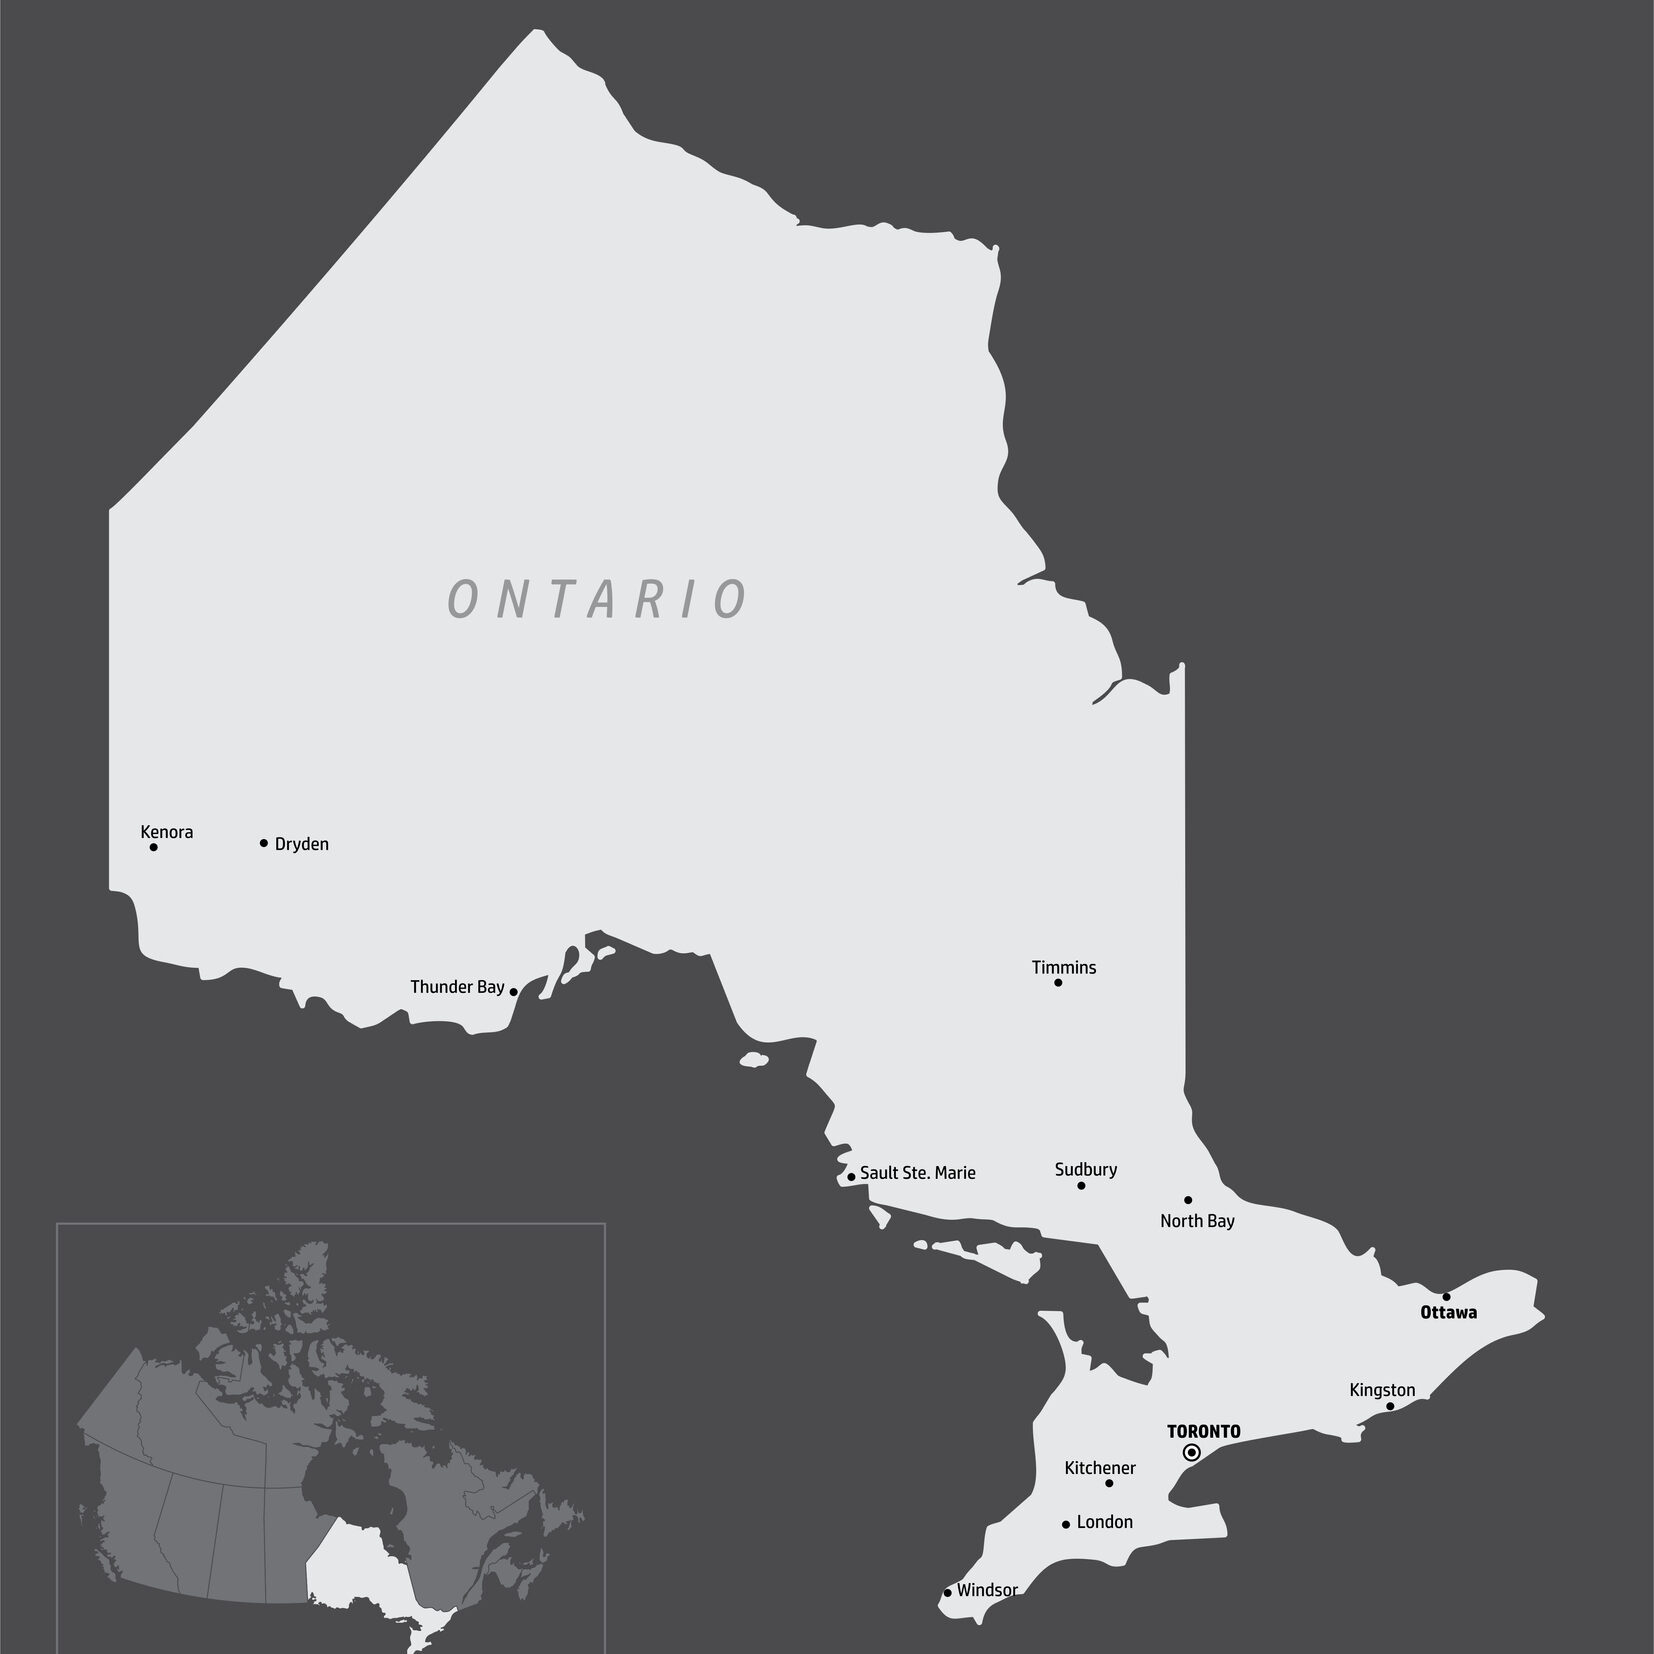 The Ontario province map with the main cities, Canada